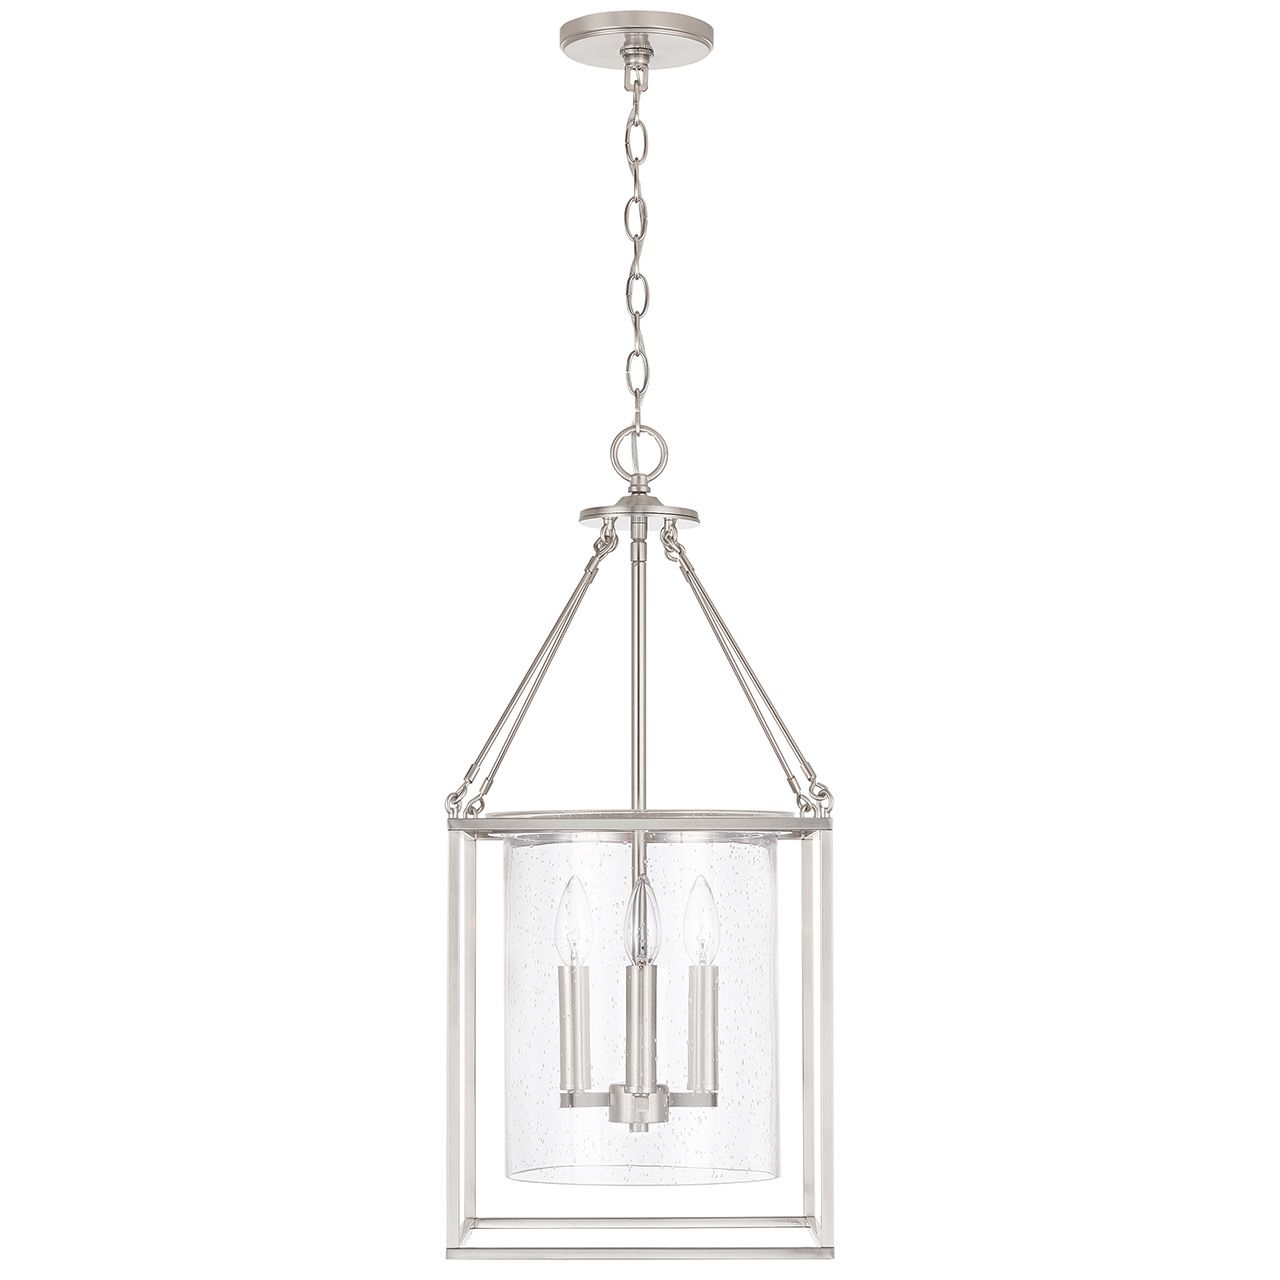 Cpt958844 Throughout Clear Glass Lantern Chandeliers (View 4 of 10)